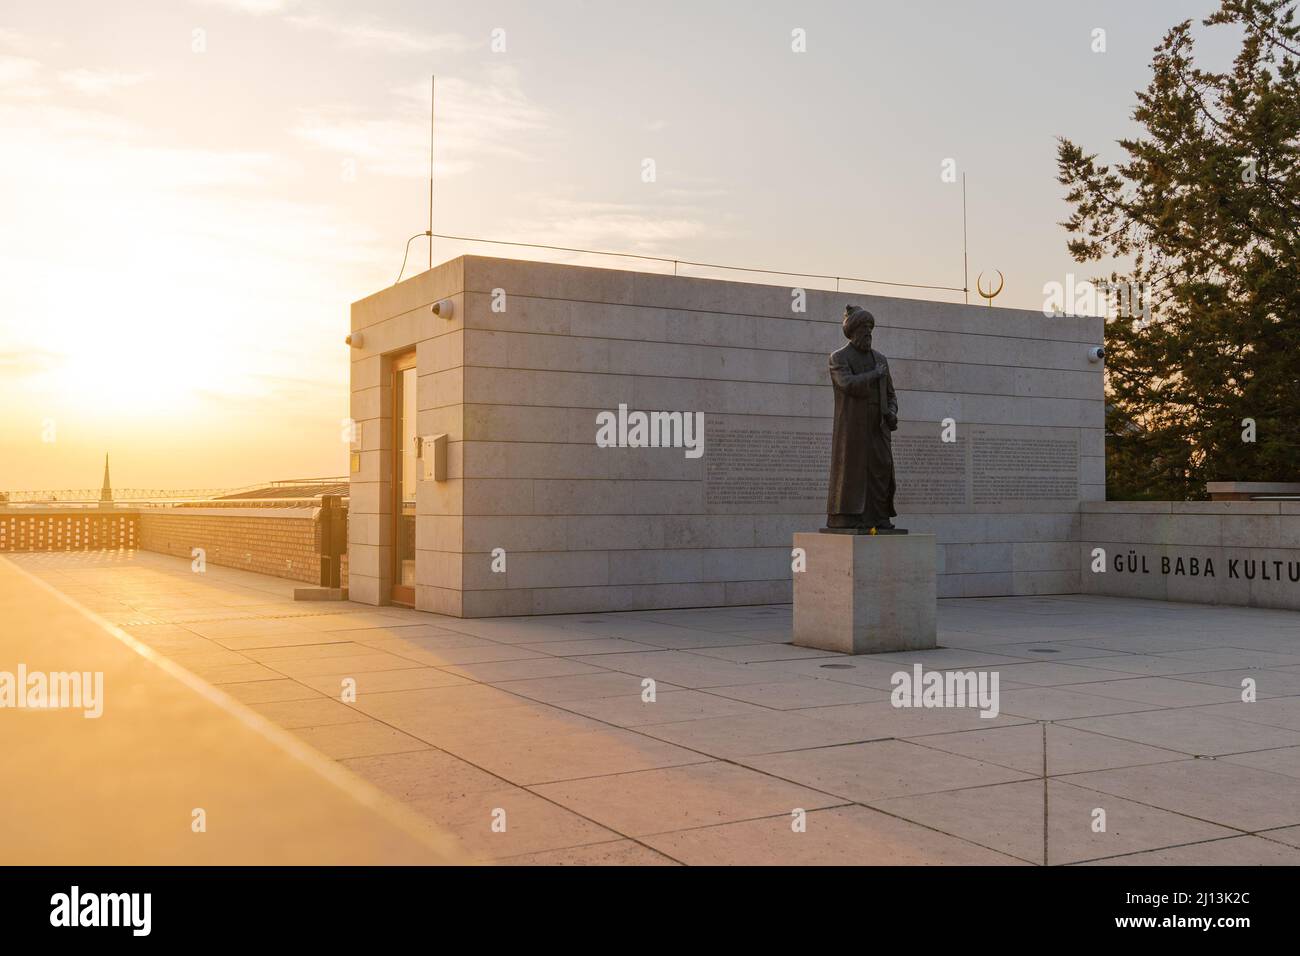 Tomb of Gul baba in budapest. Turkish memorial monument. Stock Photo